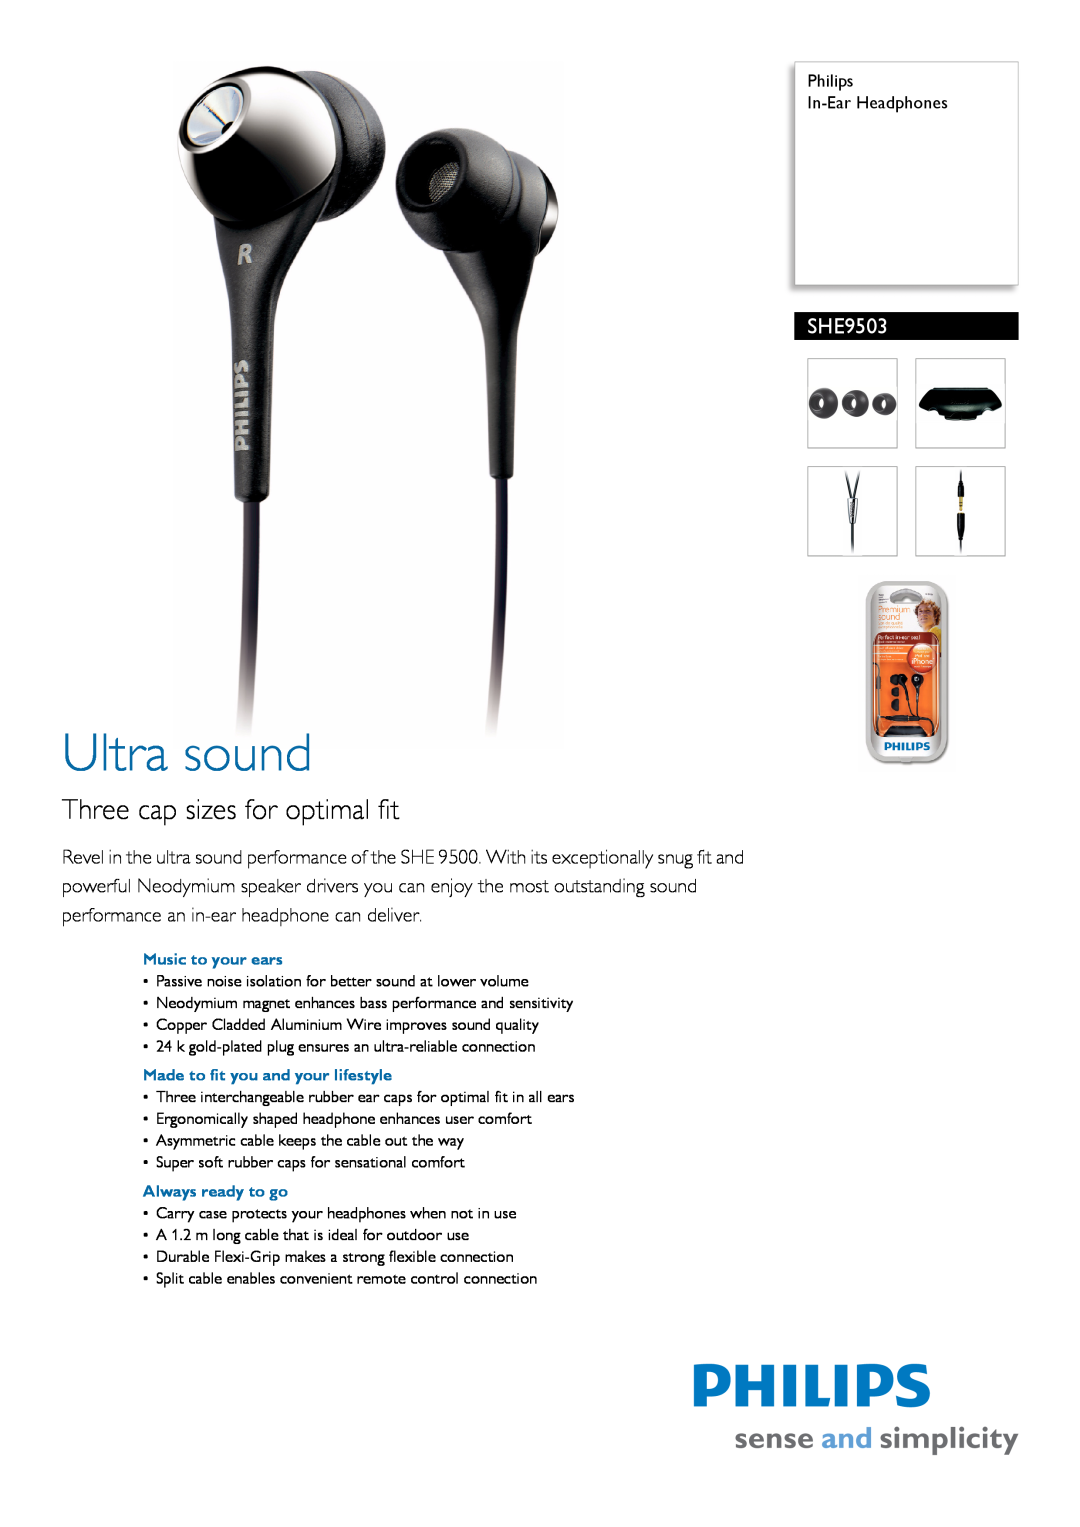 Sanyo SHE9503 manual Philips In-EarHeadphones, Ultra sound, Three cap sizes for optimal fit 